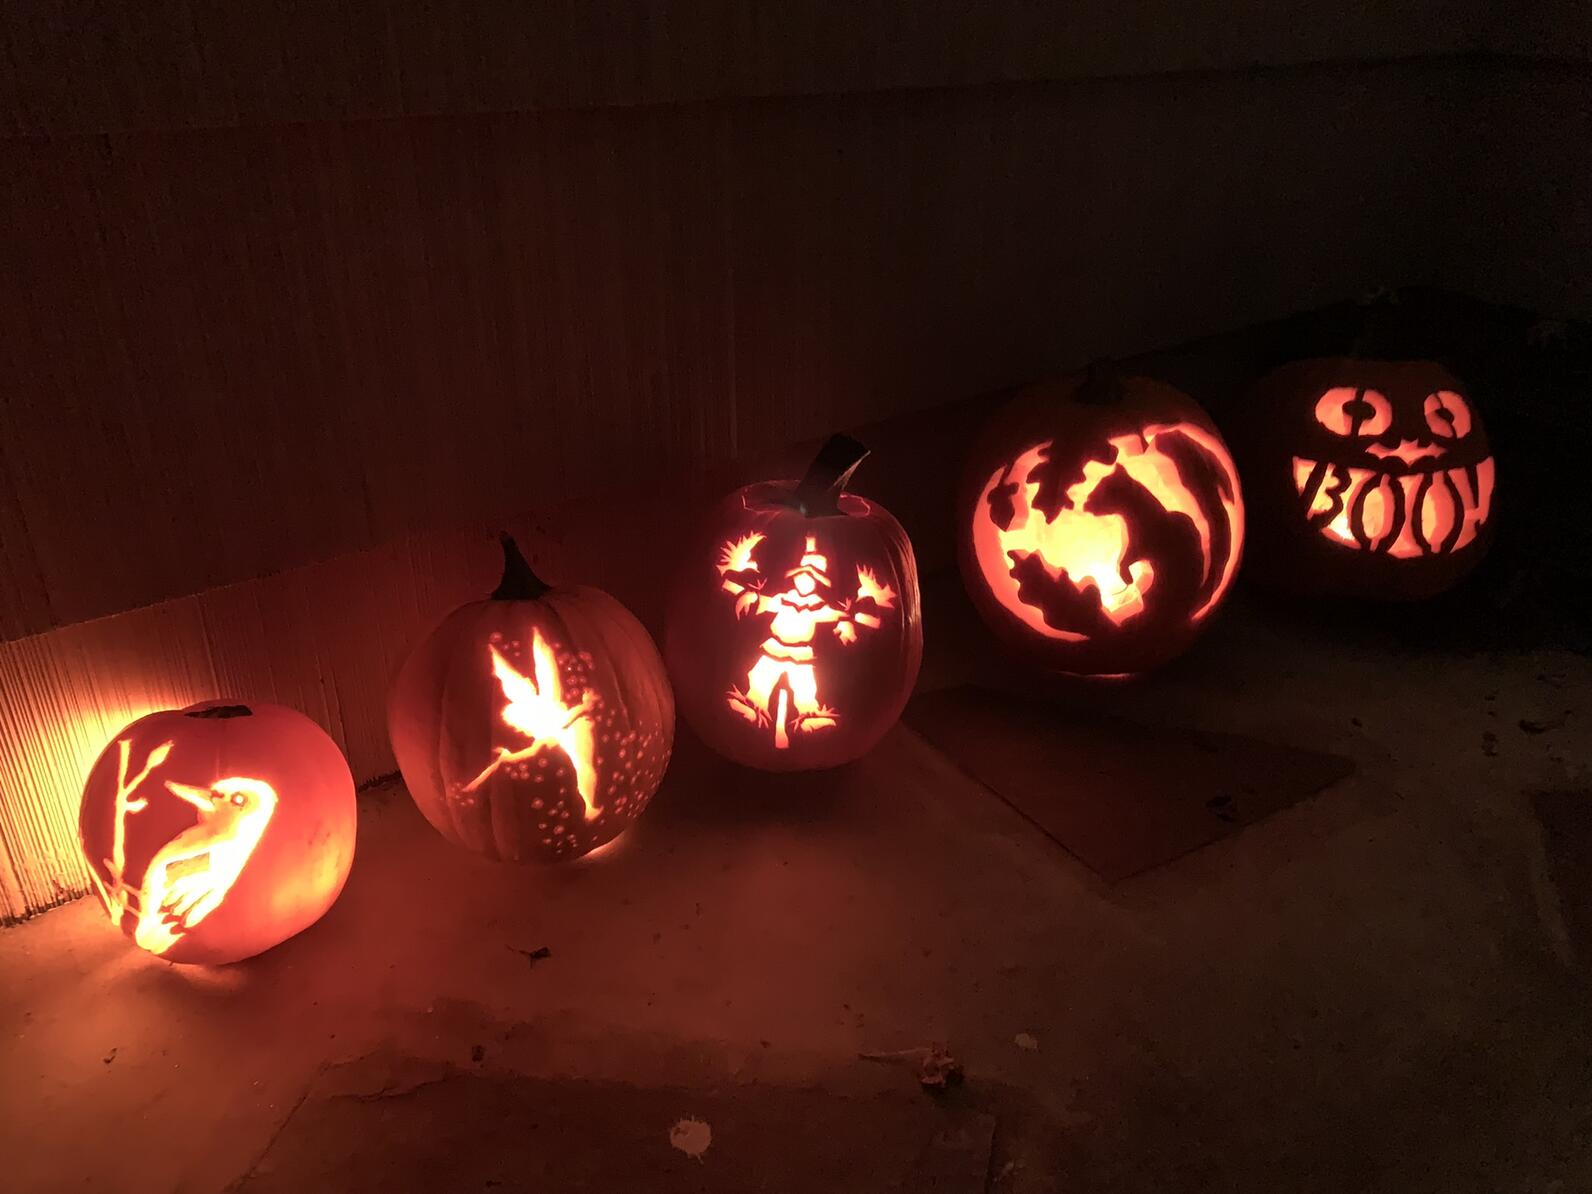 A row of glowing carved pumpkins featuring a woodpecker, fairy, scarecrow, squirrel, and a wide-smiling face that says "BOO!"